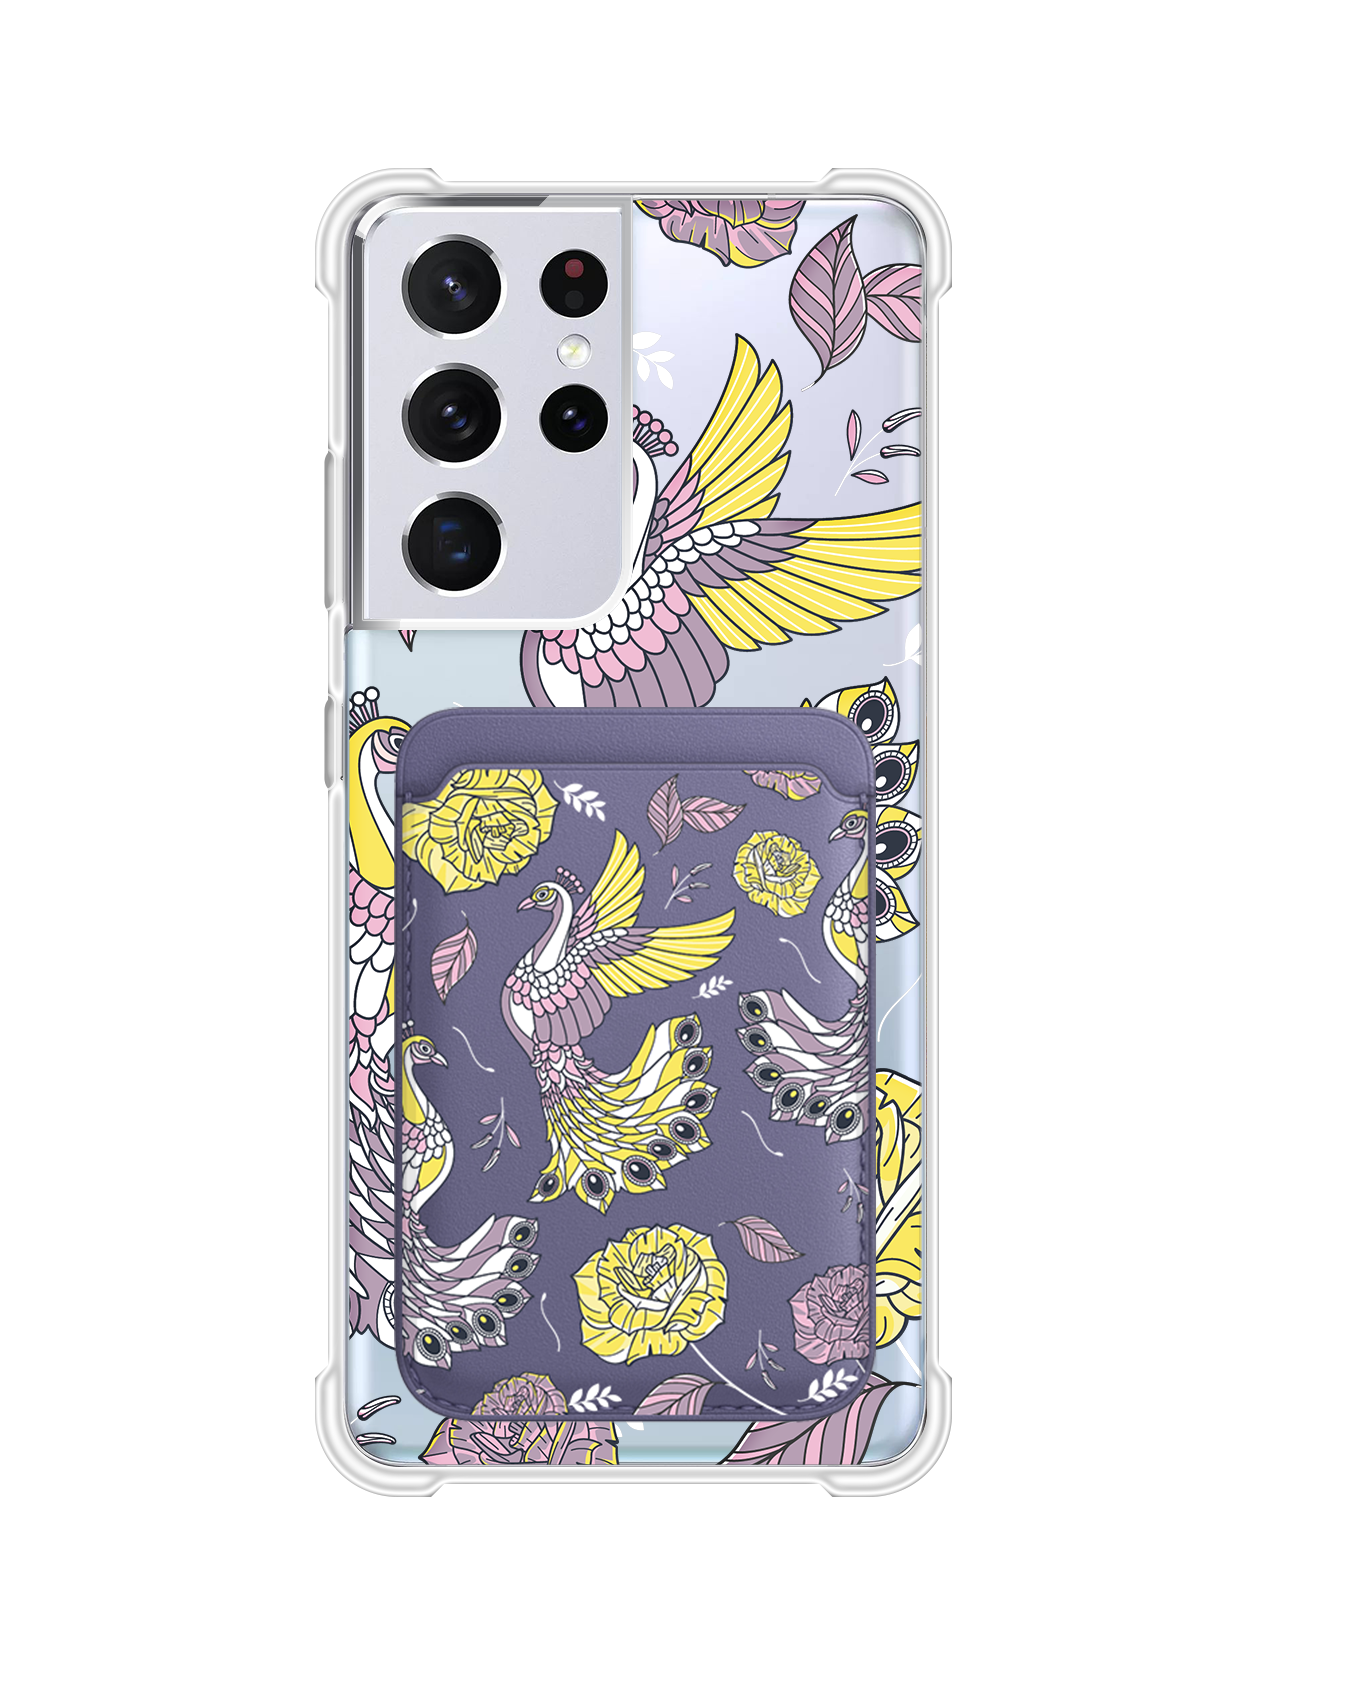 Android Magnetic Wallet Case - Bird of Paradise 4.0